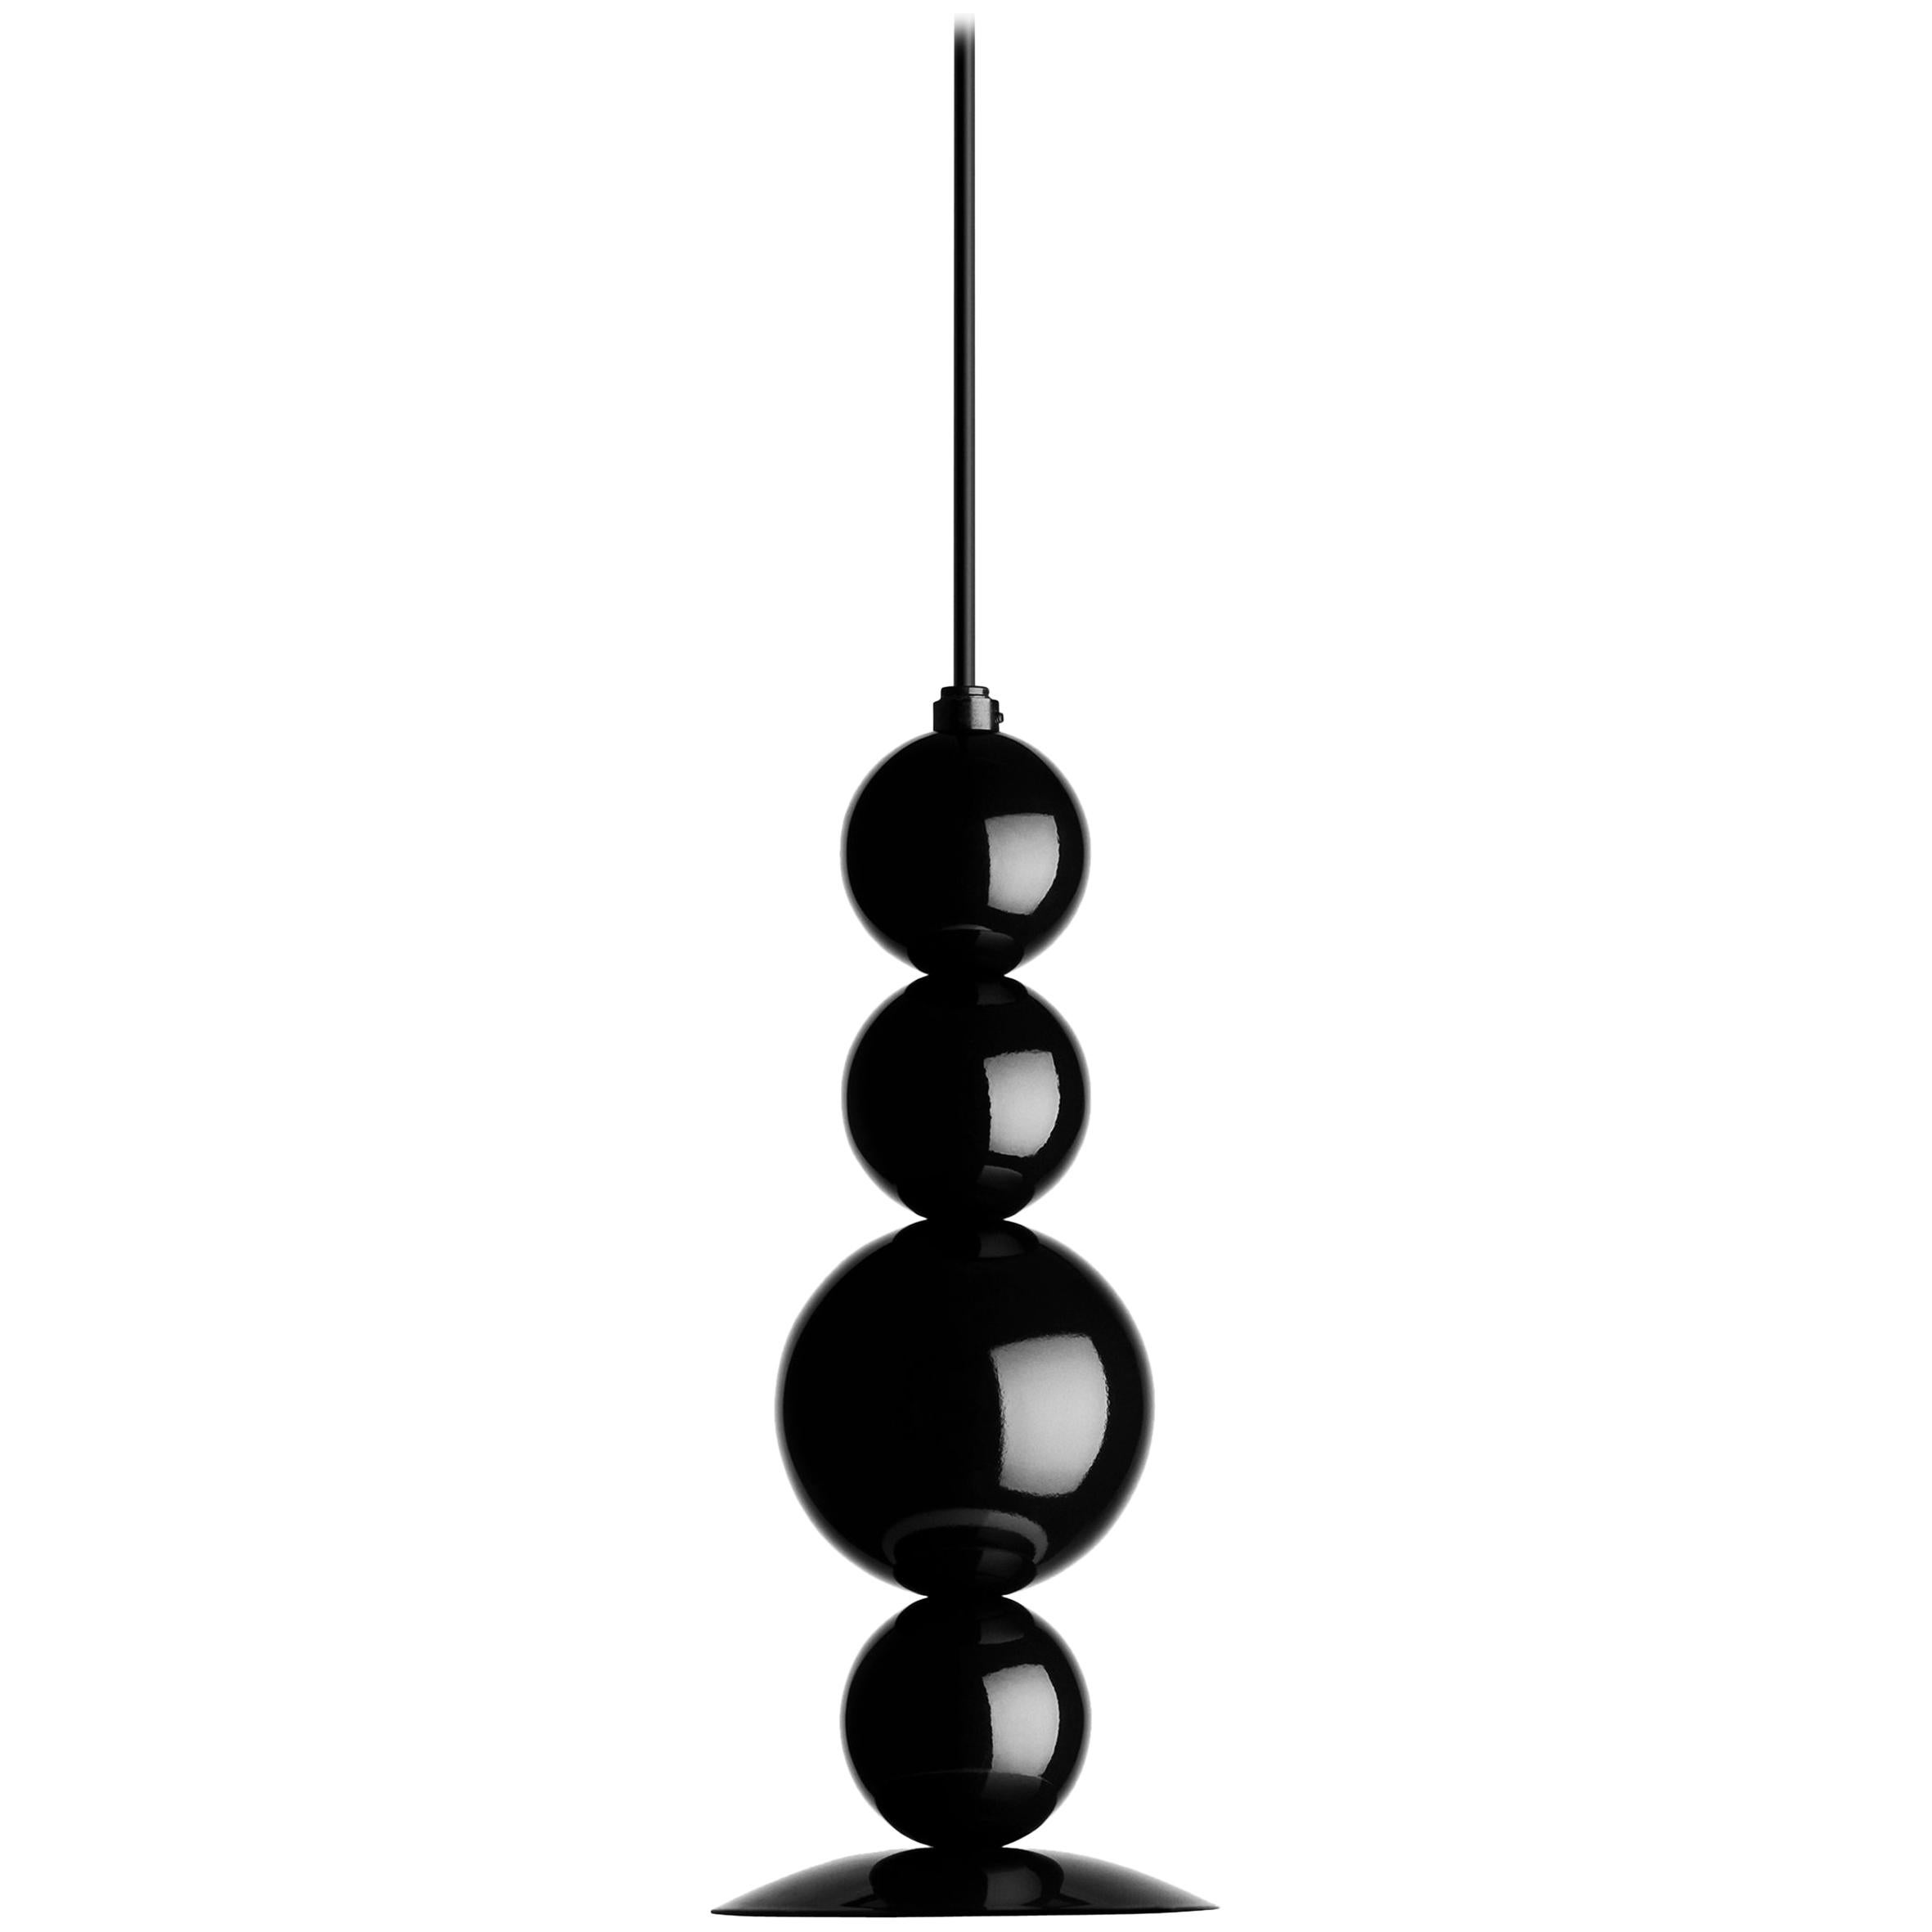 Fredrik Mattson took the idea of “lighting as jewelry” very seriously when designing his RGB pendant with its stacked wooden balls painted in glossy shades of black, green and gold or all black. Punctuated with a white glass globe, the fixture is